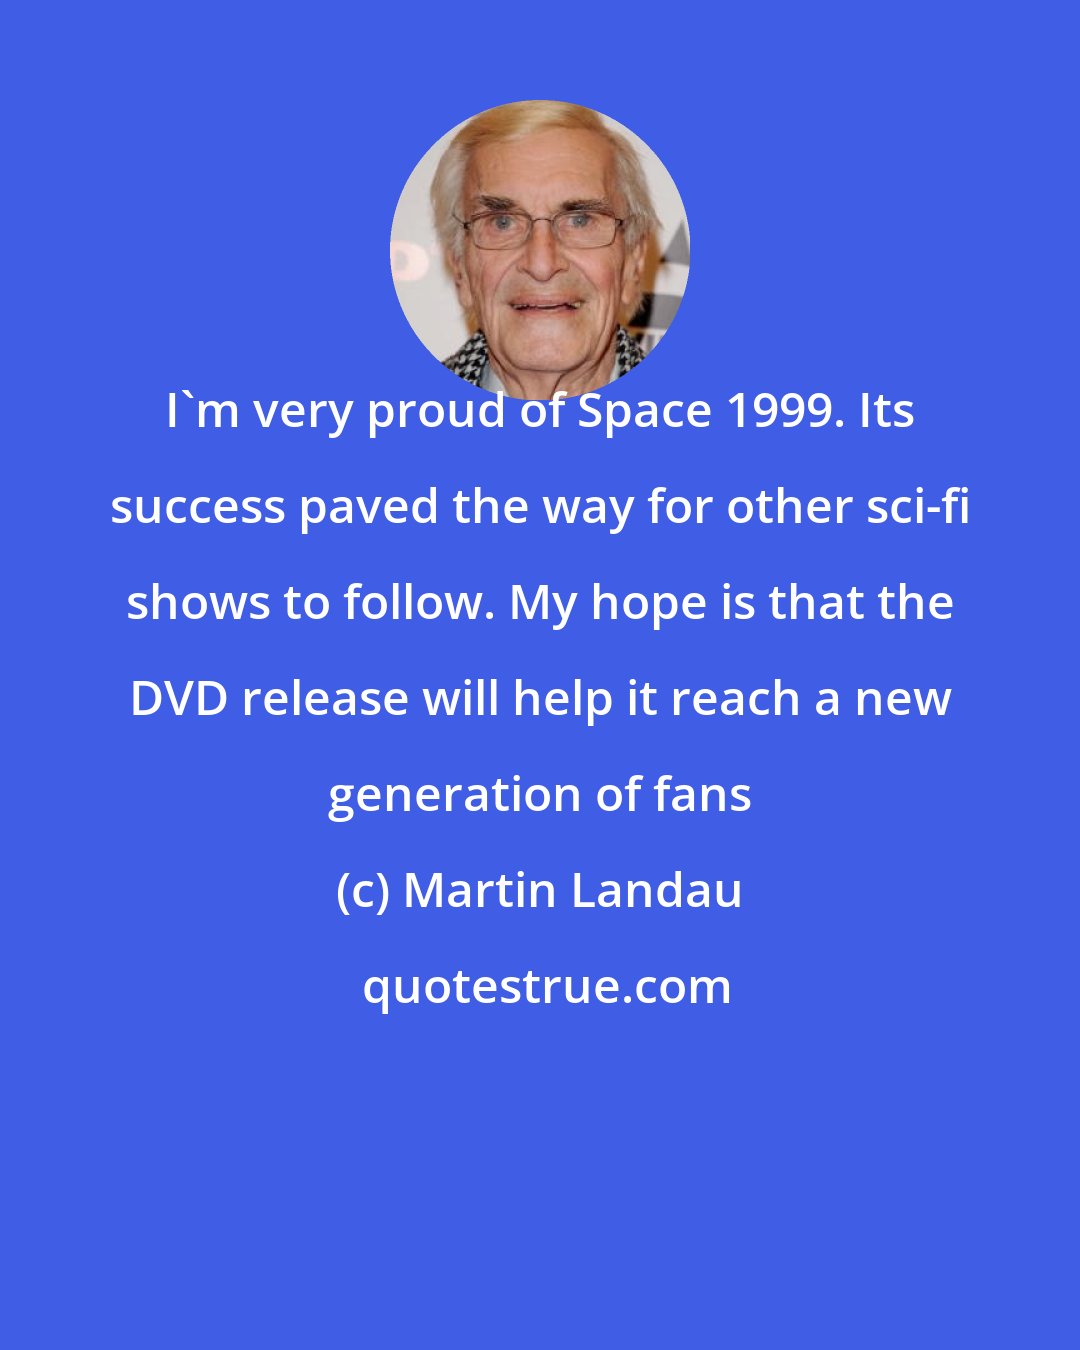 Martin Landau: I'm very proud of Space 1999. Its success paved the way for other sci-fi shows to follow. My hope is that the DVD release will help it reach a new generation of fans